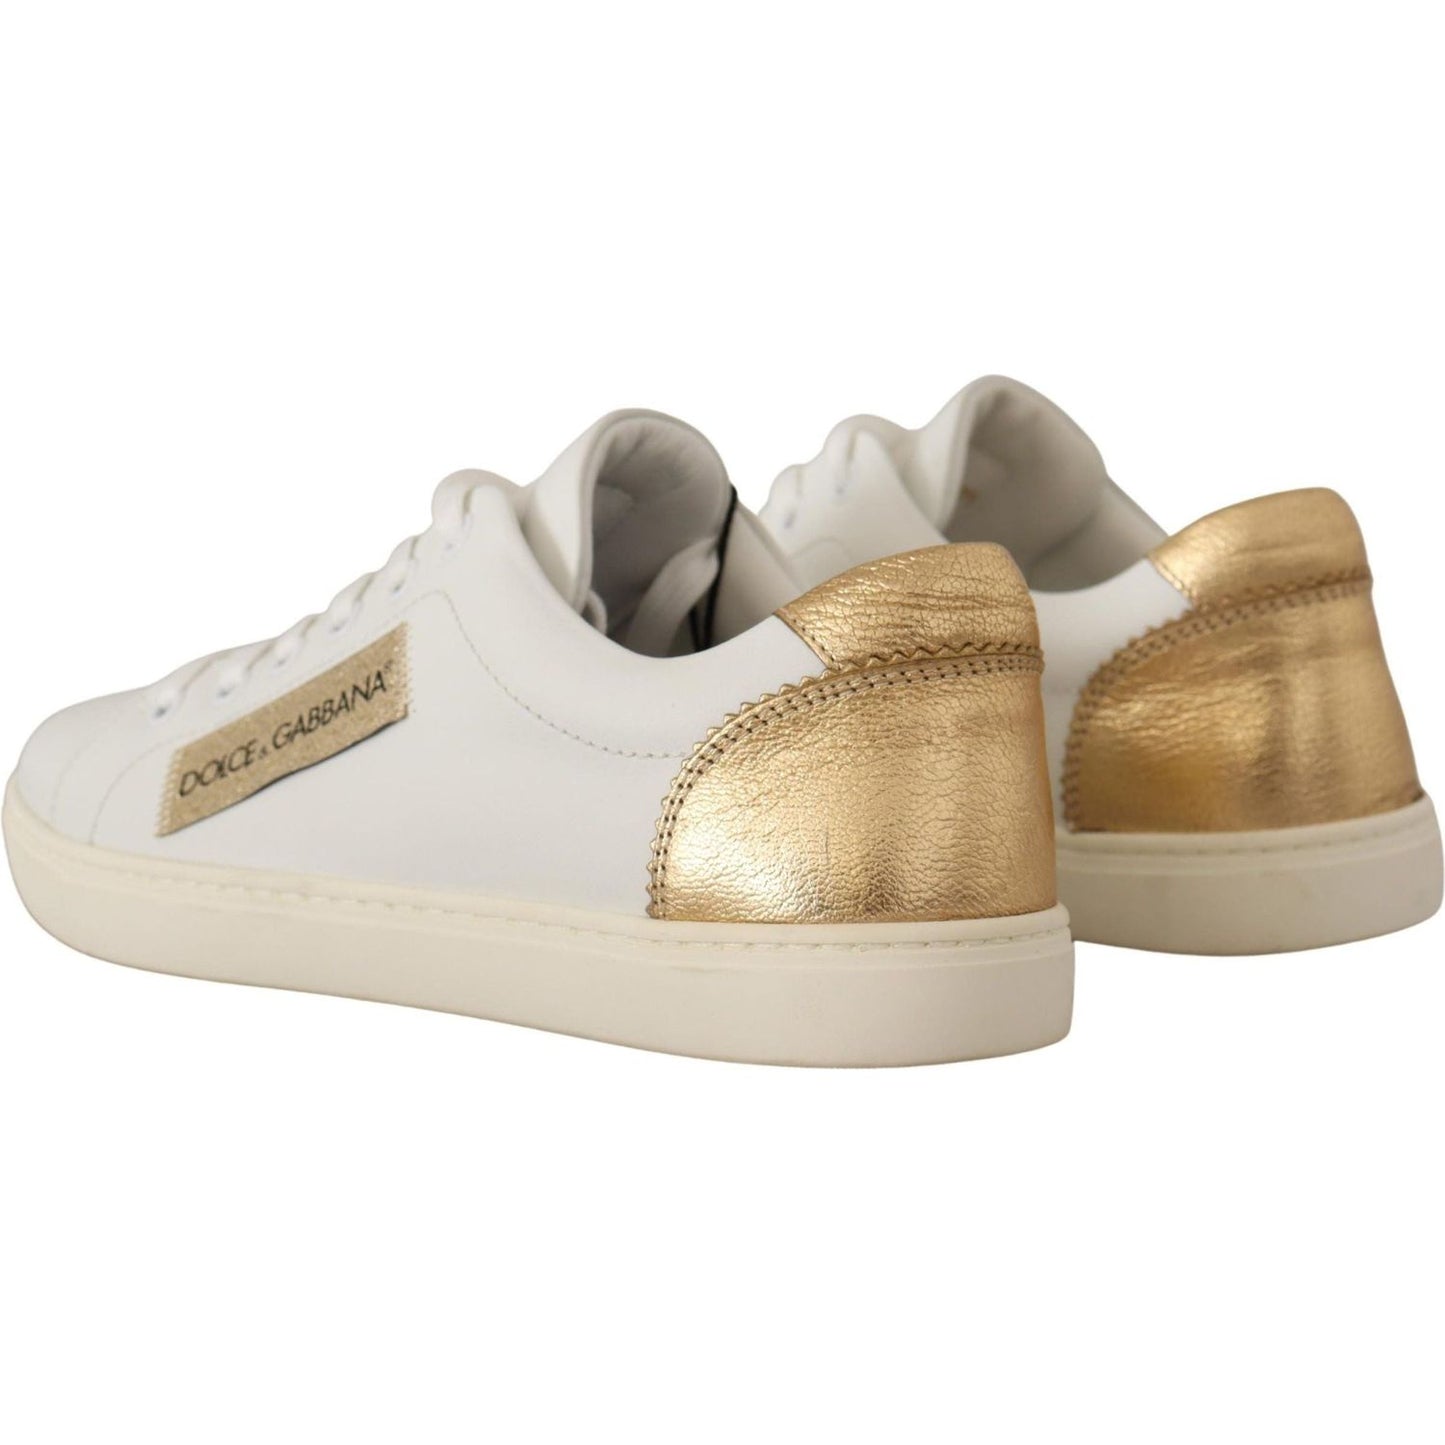 Dolce & Gabbana Elegant White Leather Sneakers with Gold Accents white-gold-leather-low-top-sneakers IMG_0491-scaled-7c16326e-d4a.jpg